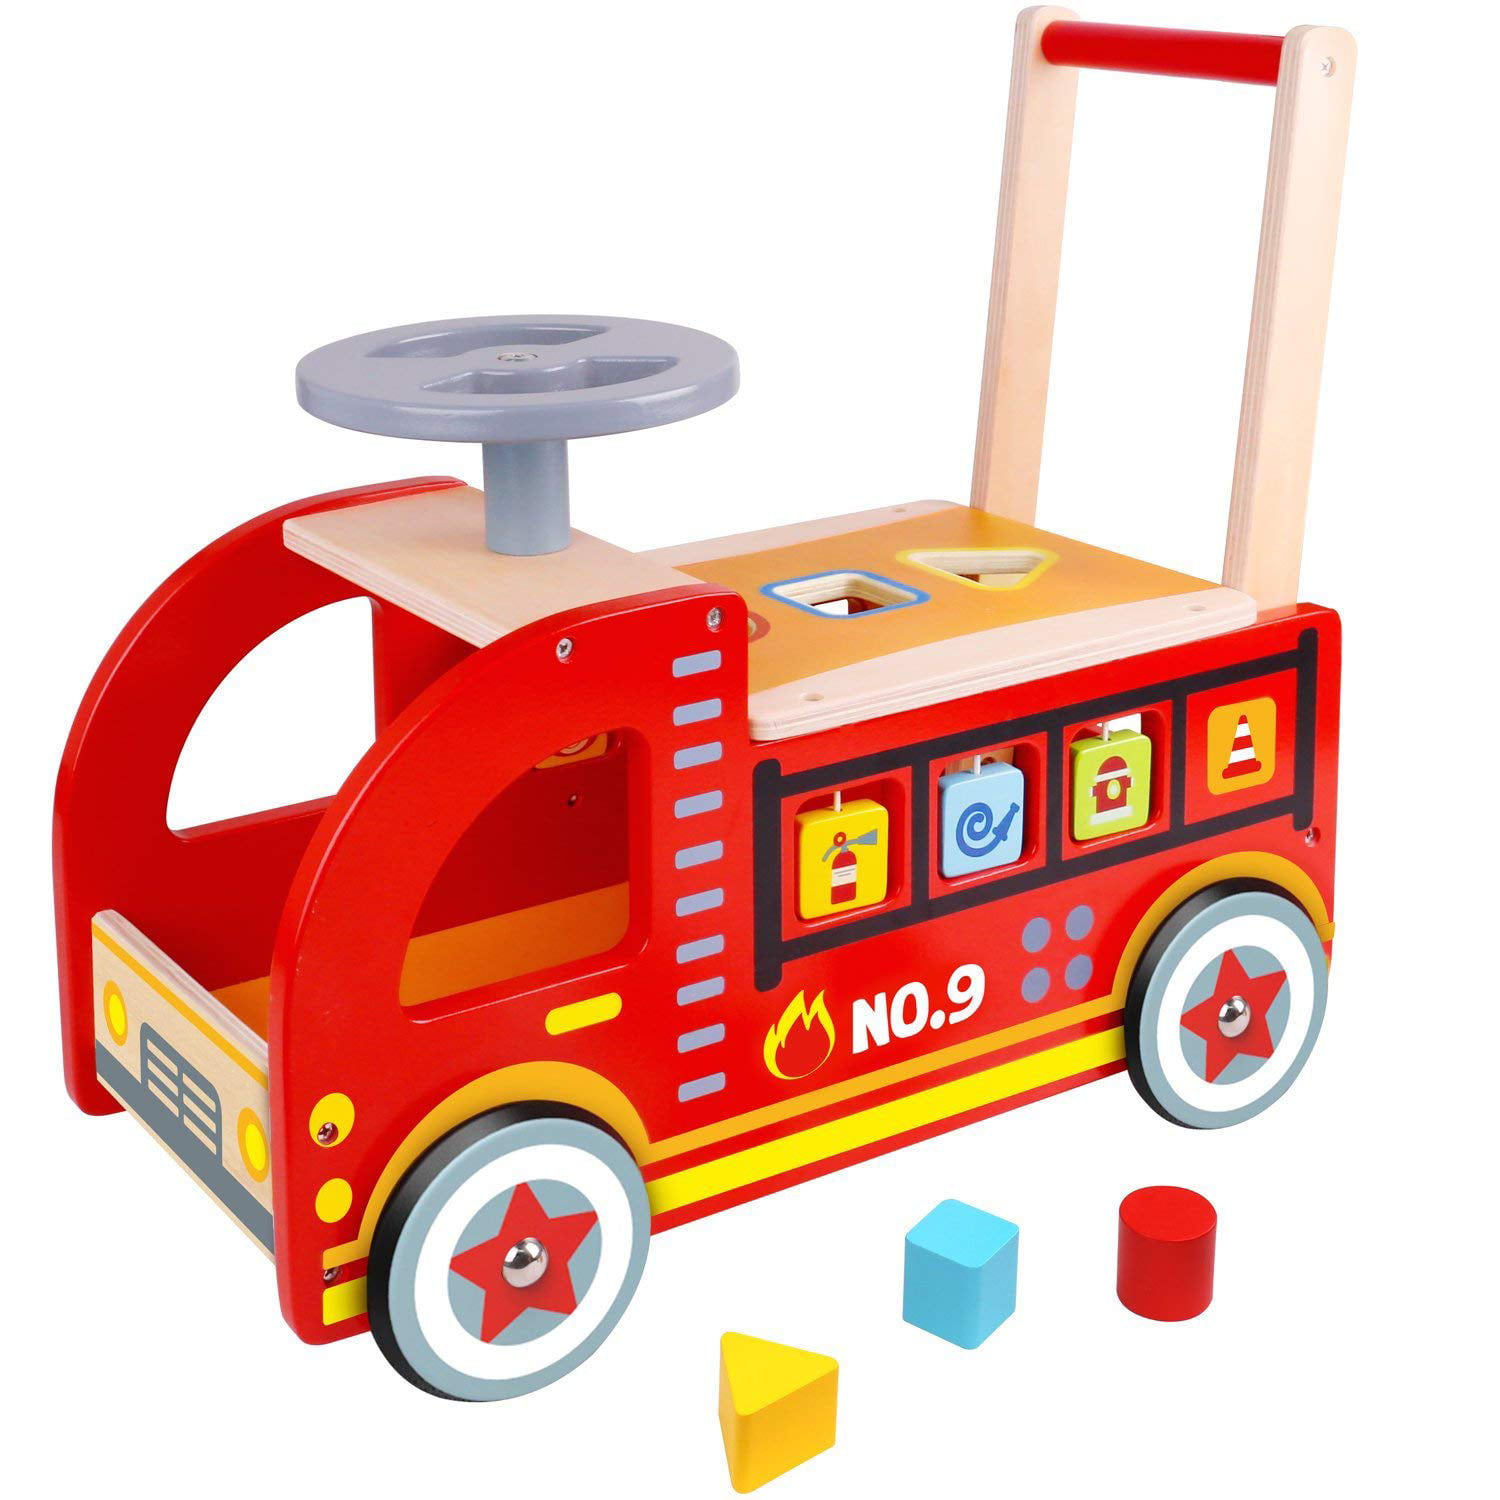 Featured image of post Ride On Toy Fire Engine - This fire engine truck toy also has extendable support legs that provide stability during playtime.